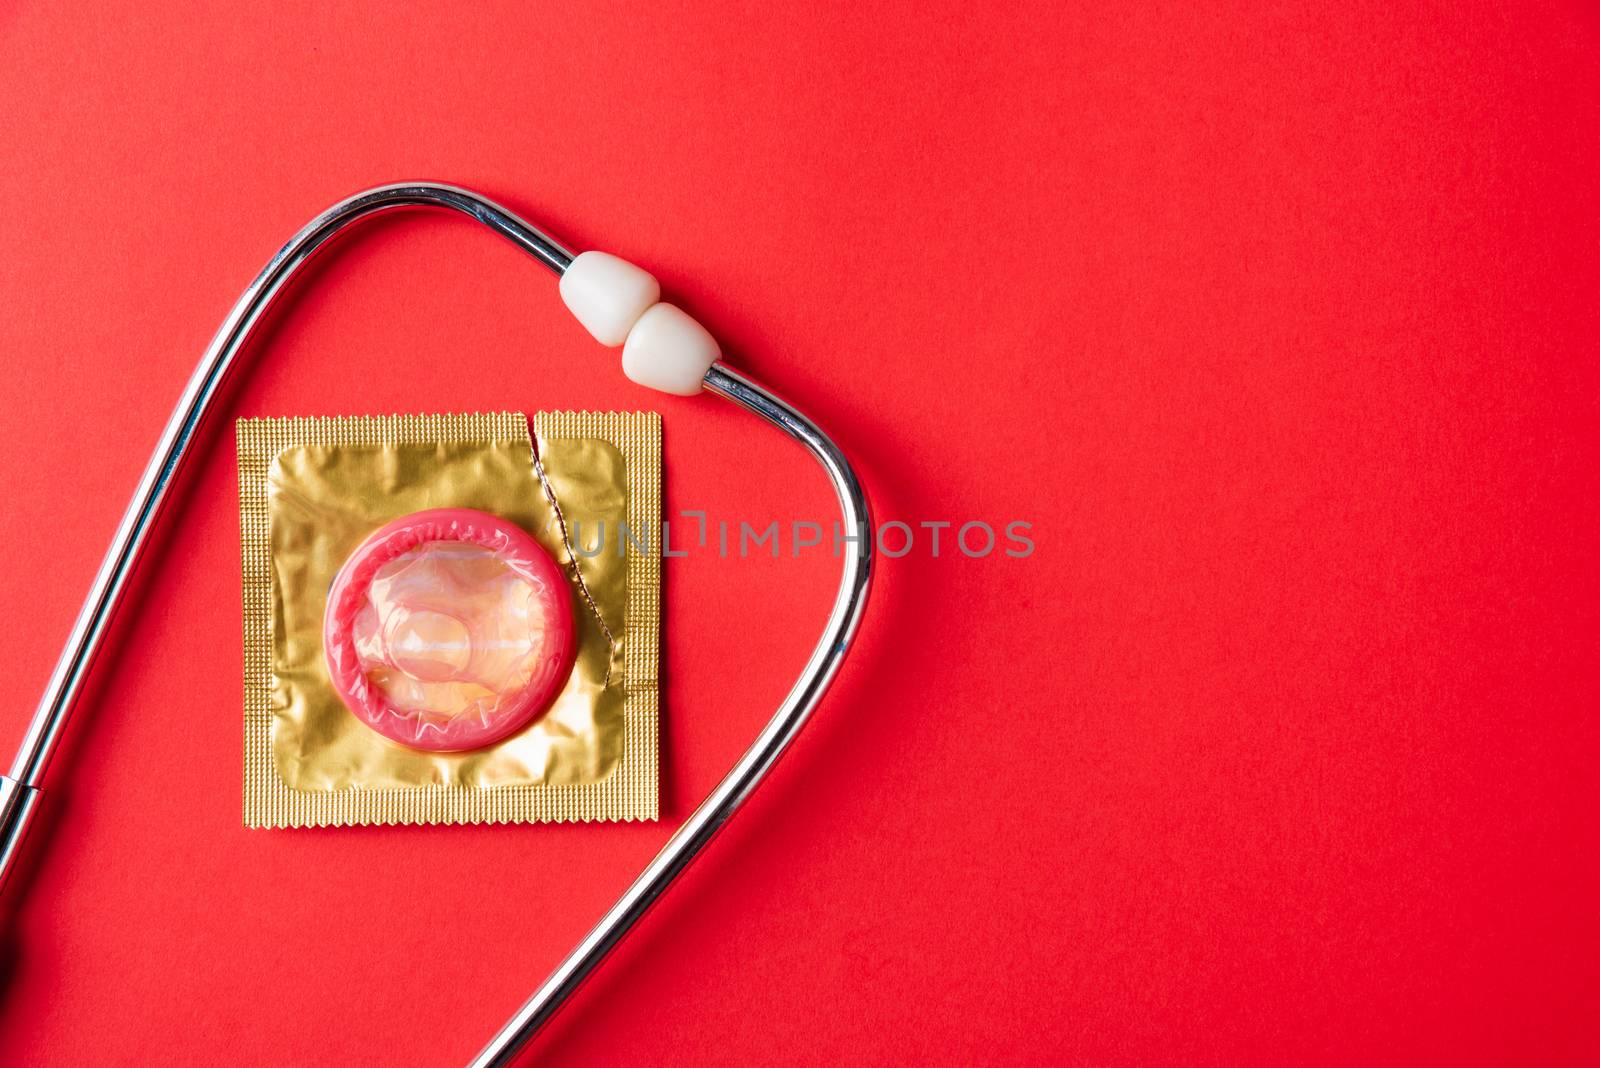 World sexual health or Aids day, Top view flat lay medical equipment, condom in pack and stethoscope, studio shot isolated on a red  background, Safe sex and reproductive health concept